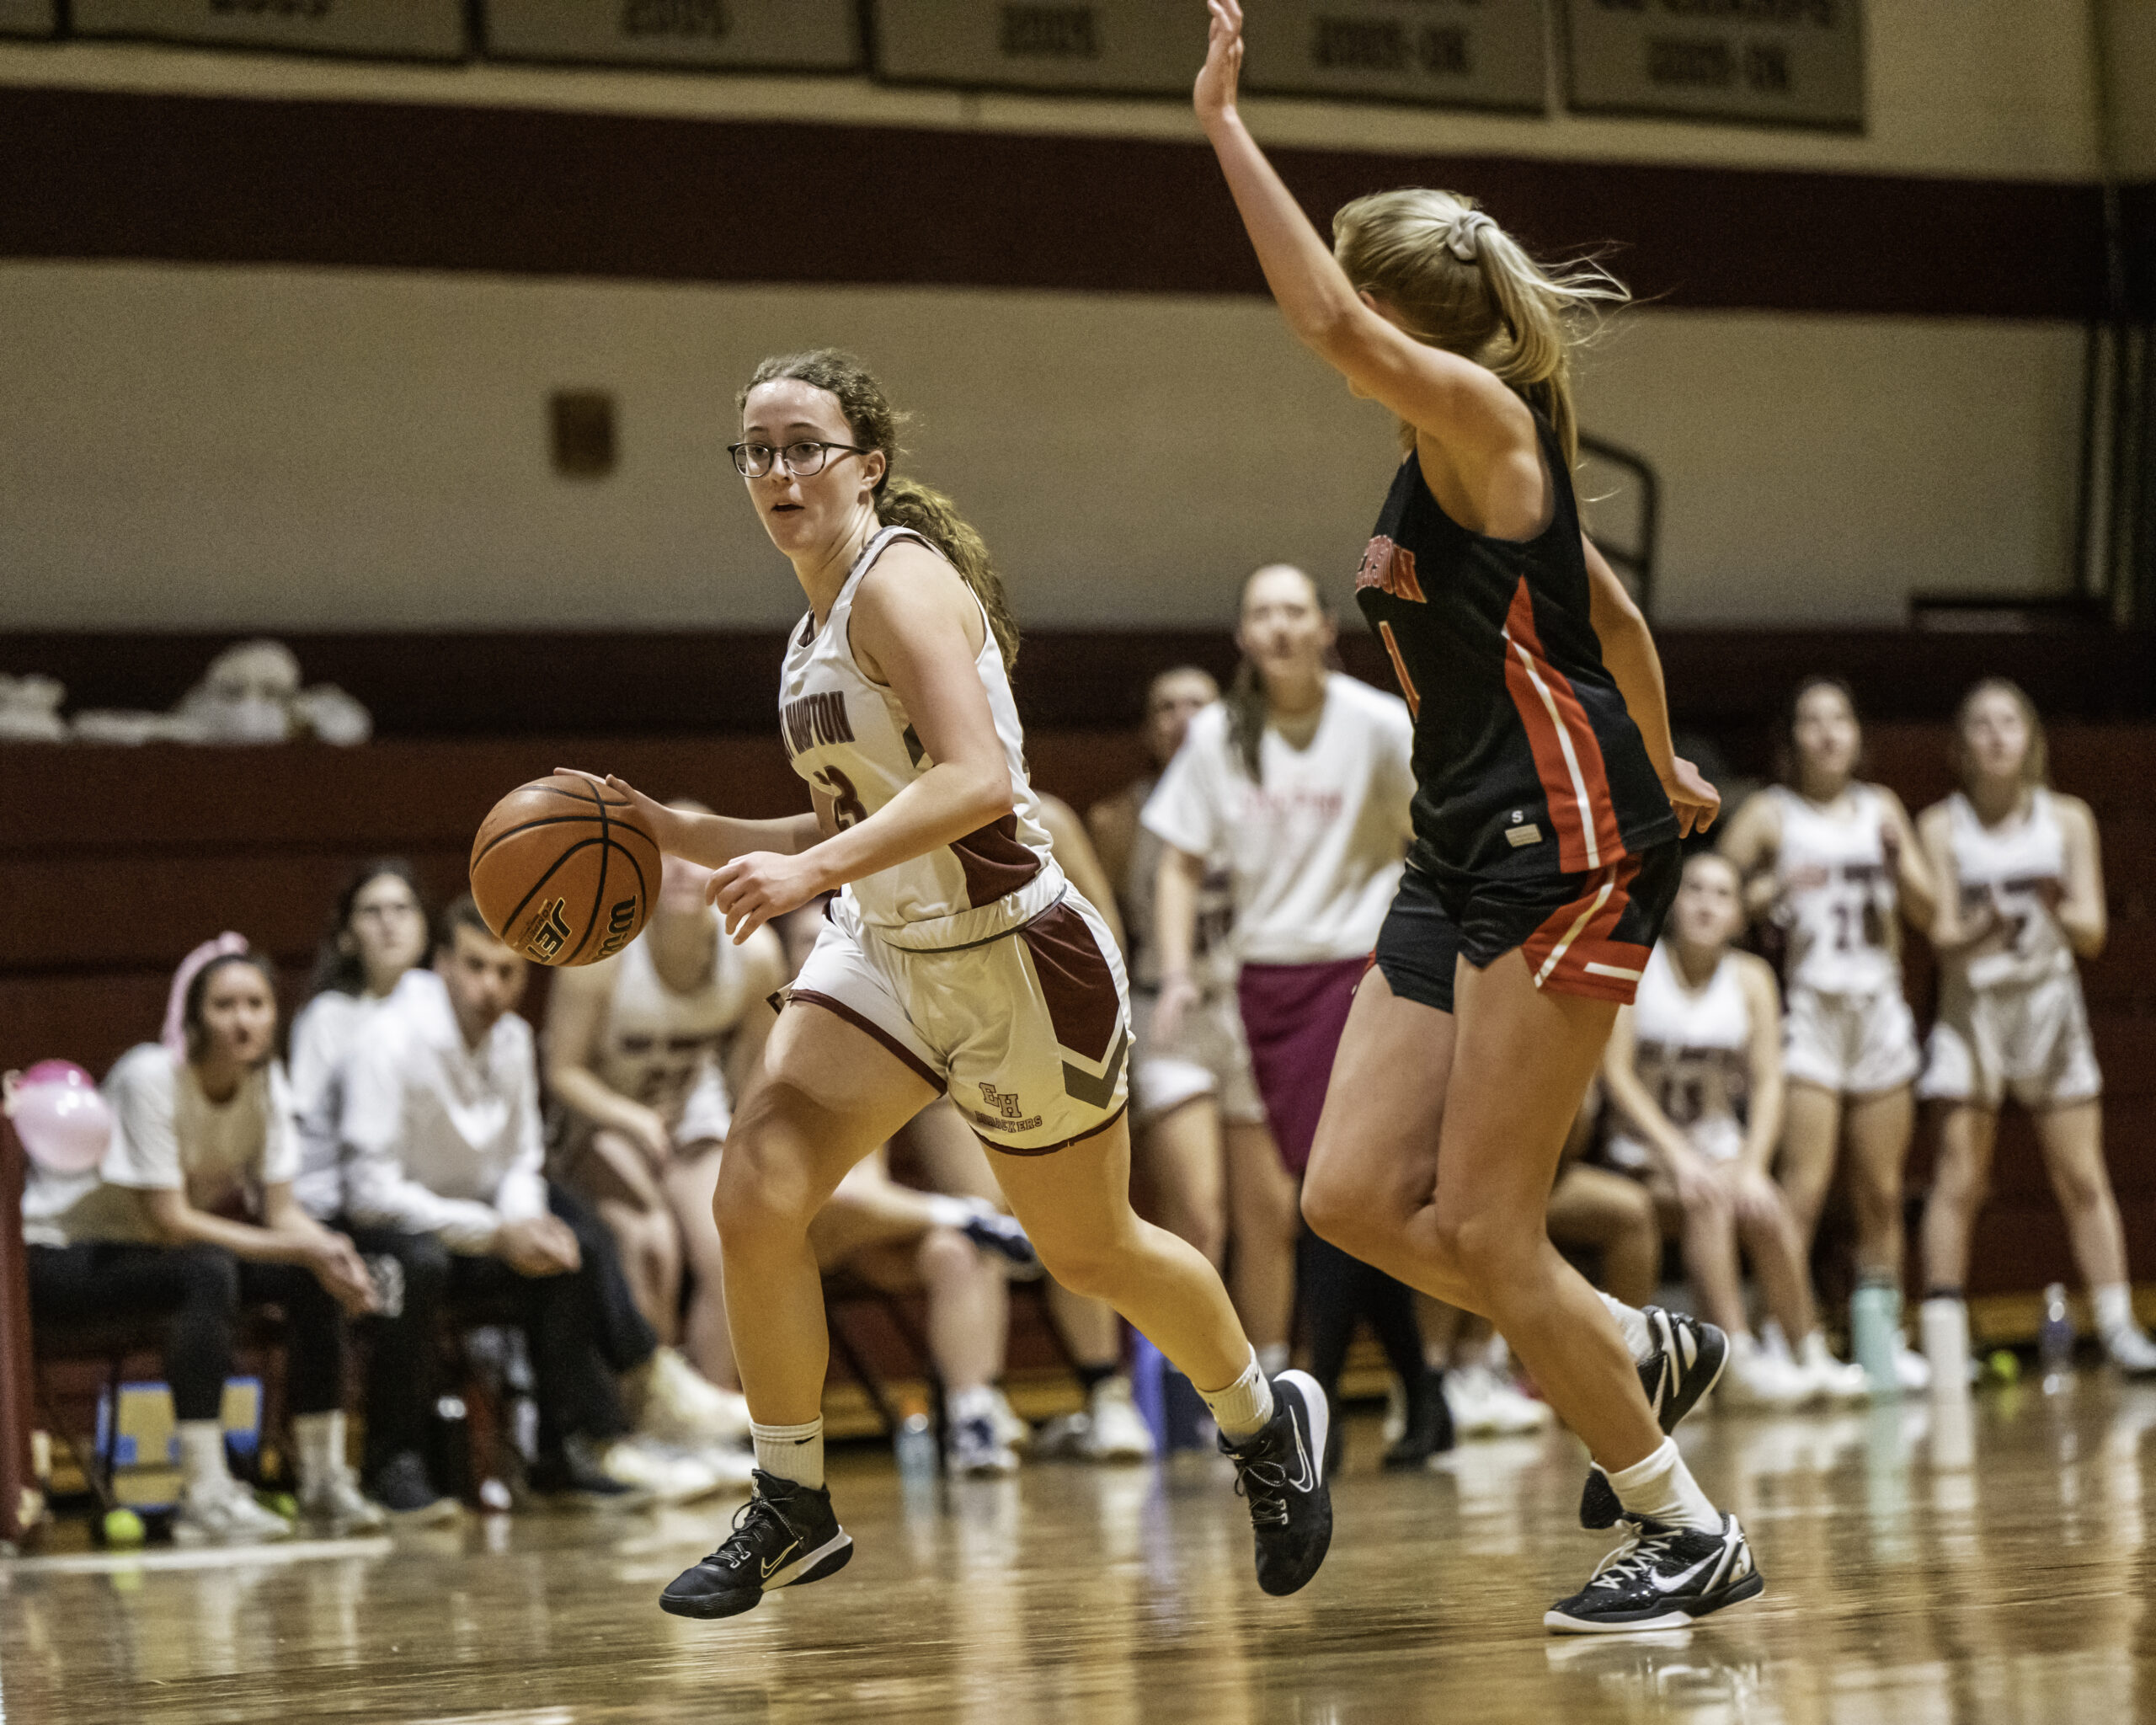 East Hampton's Chloe Swickard dribbles the ball down the court with Pierson's Coco Lohmiller covering her.    MARIANNE BARNETT